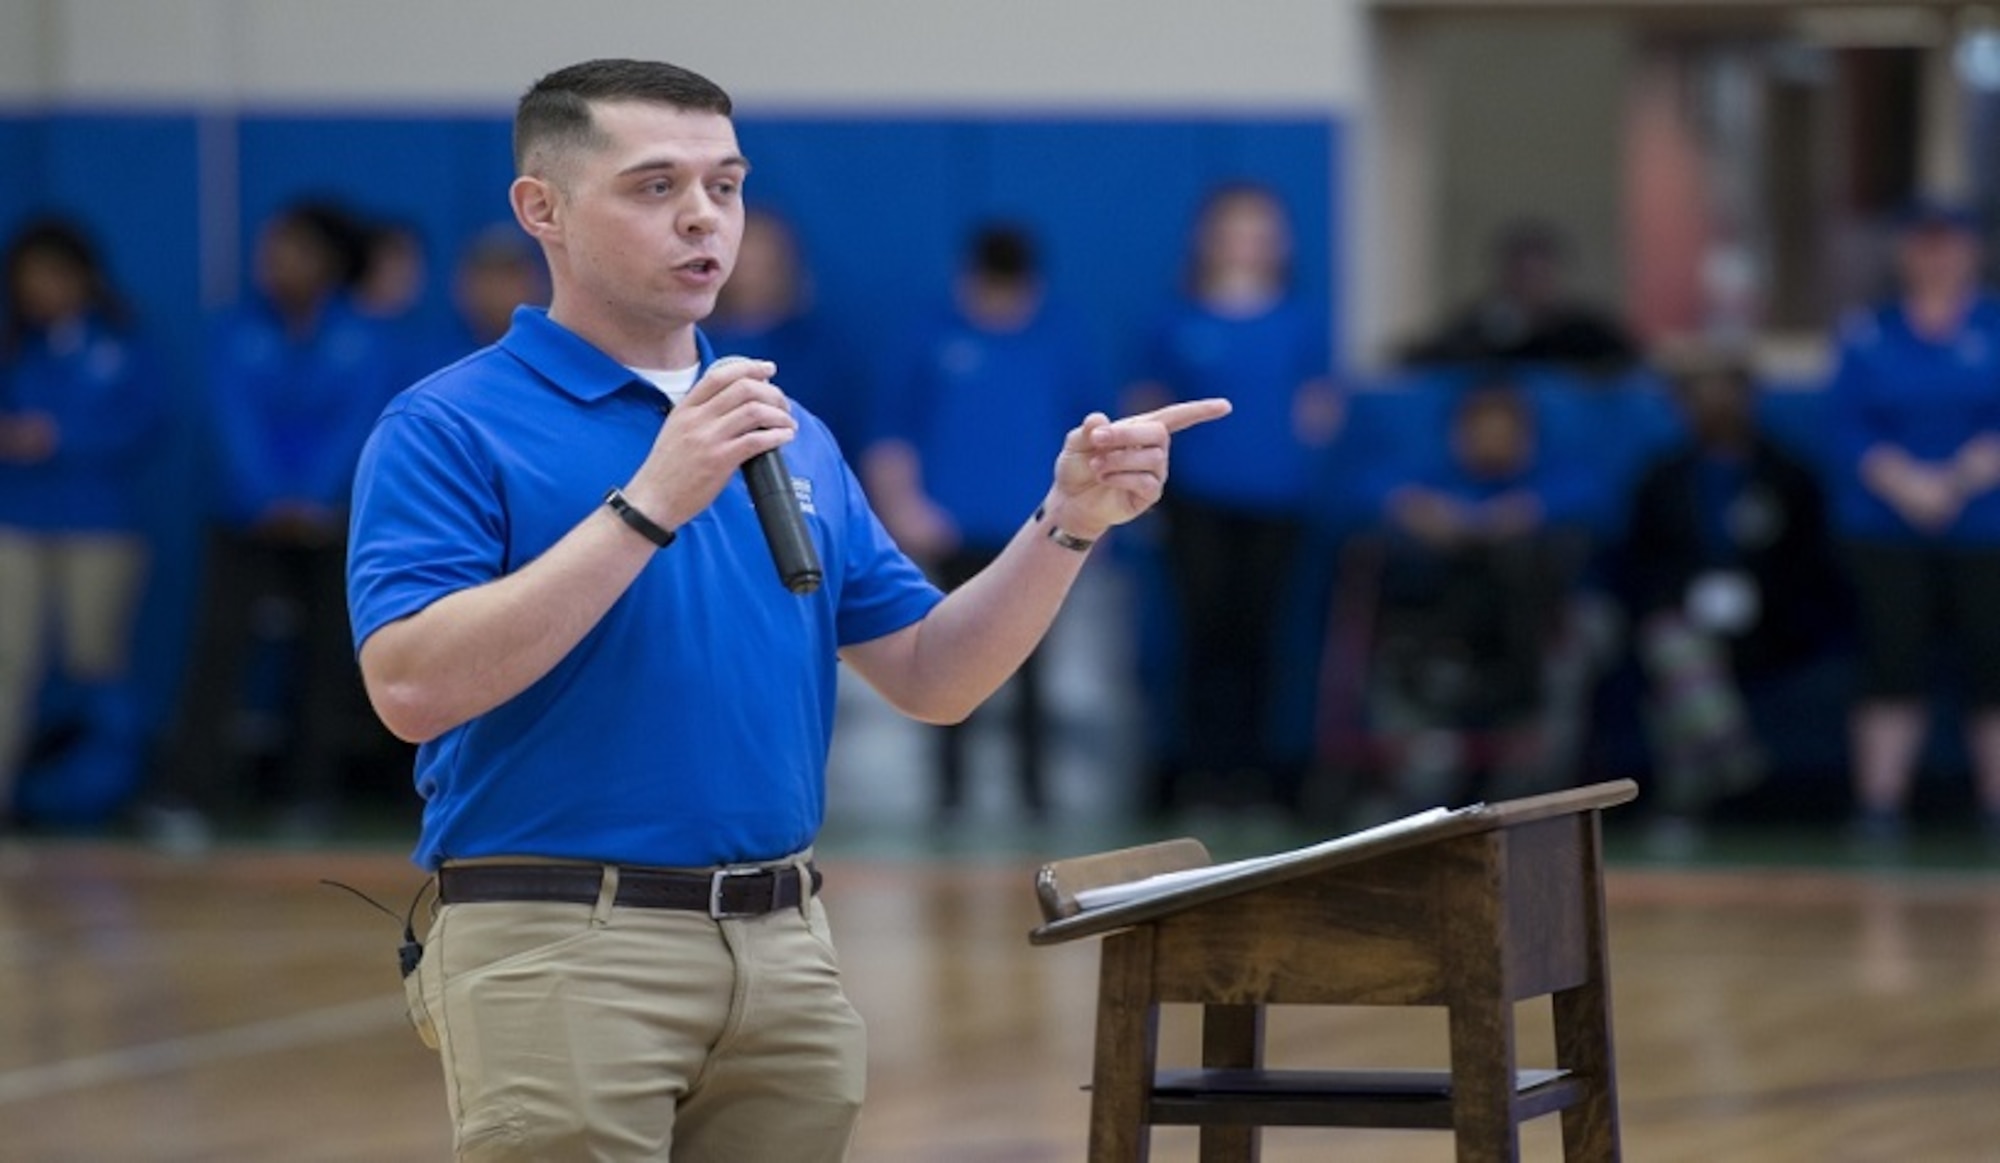 U.S. Air Force Tech. Sgt. Trevor Brewer, 72nd Security Forces Squadron assistant flight chief, speaks during the opening ceremony of the 2018 South Central Warrior CARE Event at Joint Base San Antonio-Randolph, Texas, Jan. 8, 2018. Brewer suffers from invisible wounds, specifically post-traumatic stress disorder (PTSD), steaming from a terrorist attack that took place overseas in March 2011. (U.S. Air Force photo by Sean M. Worrell)